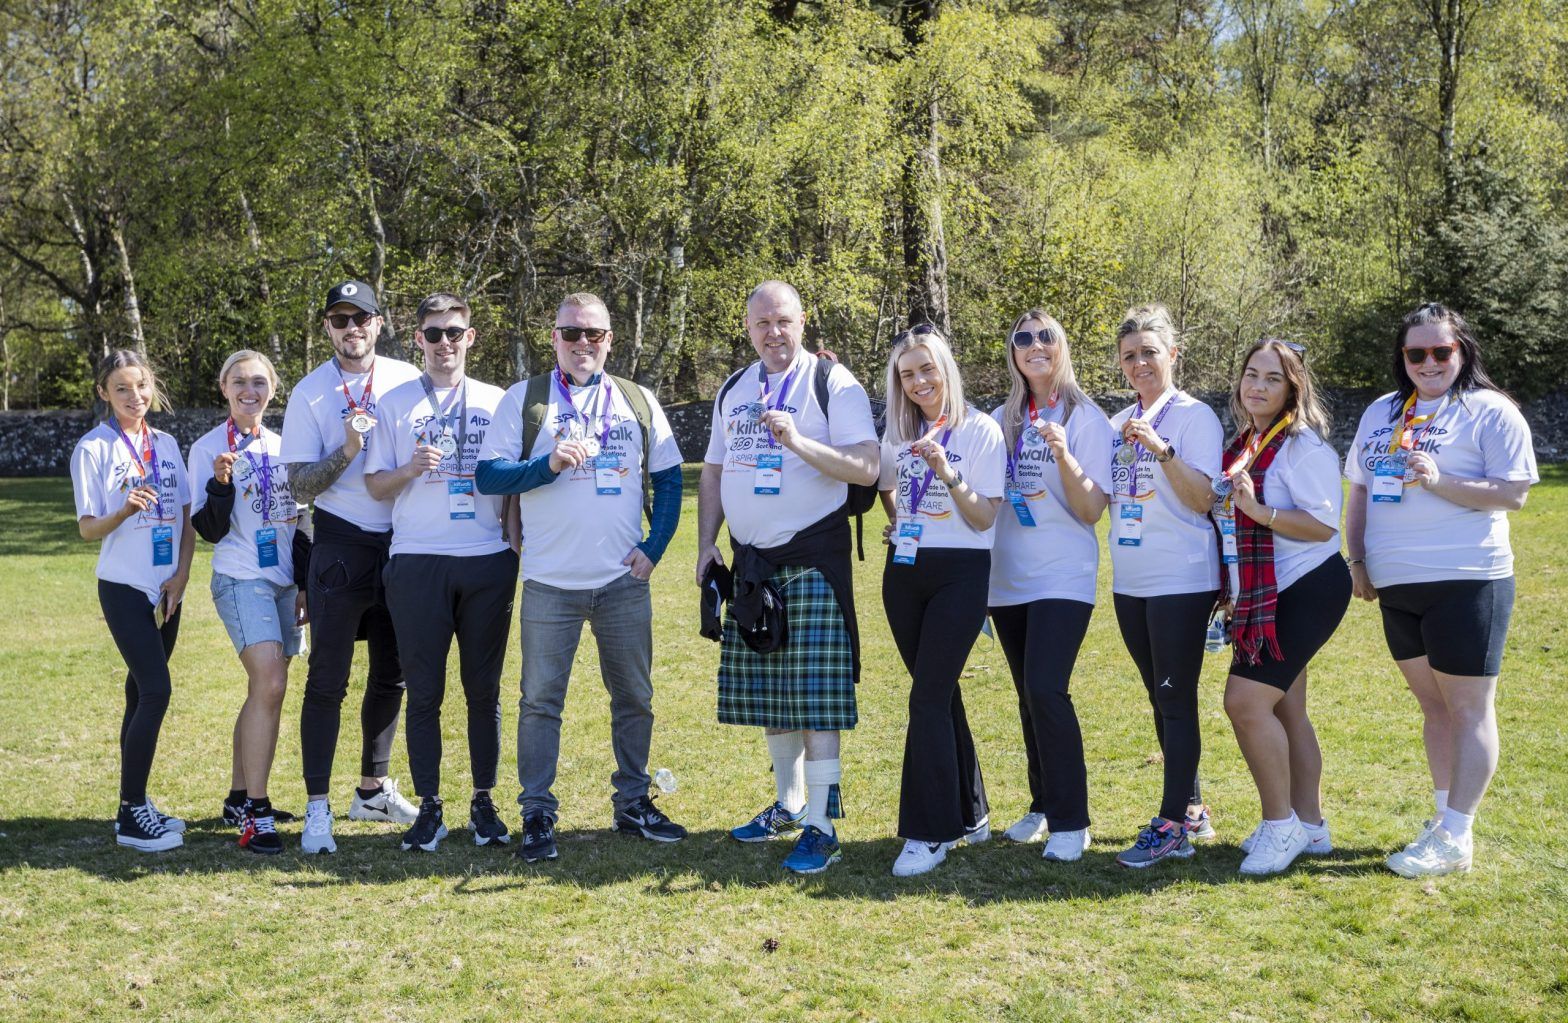 Thank you for taking part in the Kiltwalk 2022!